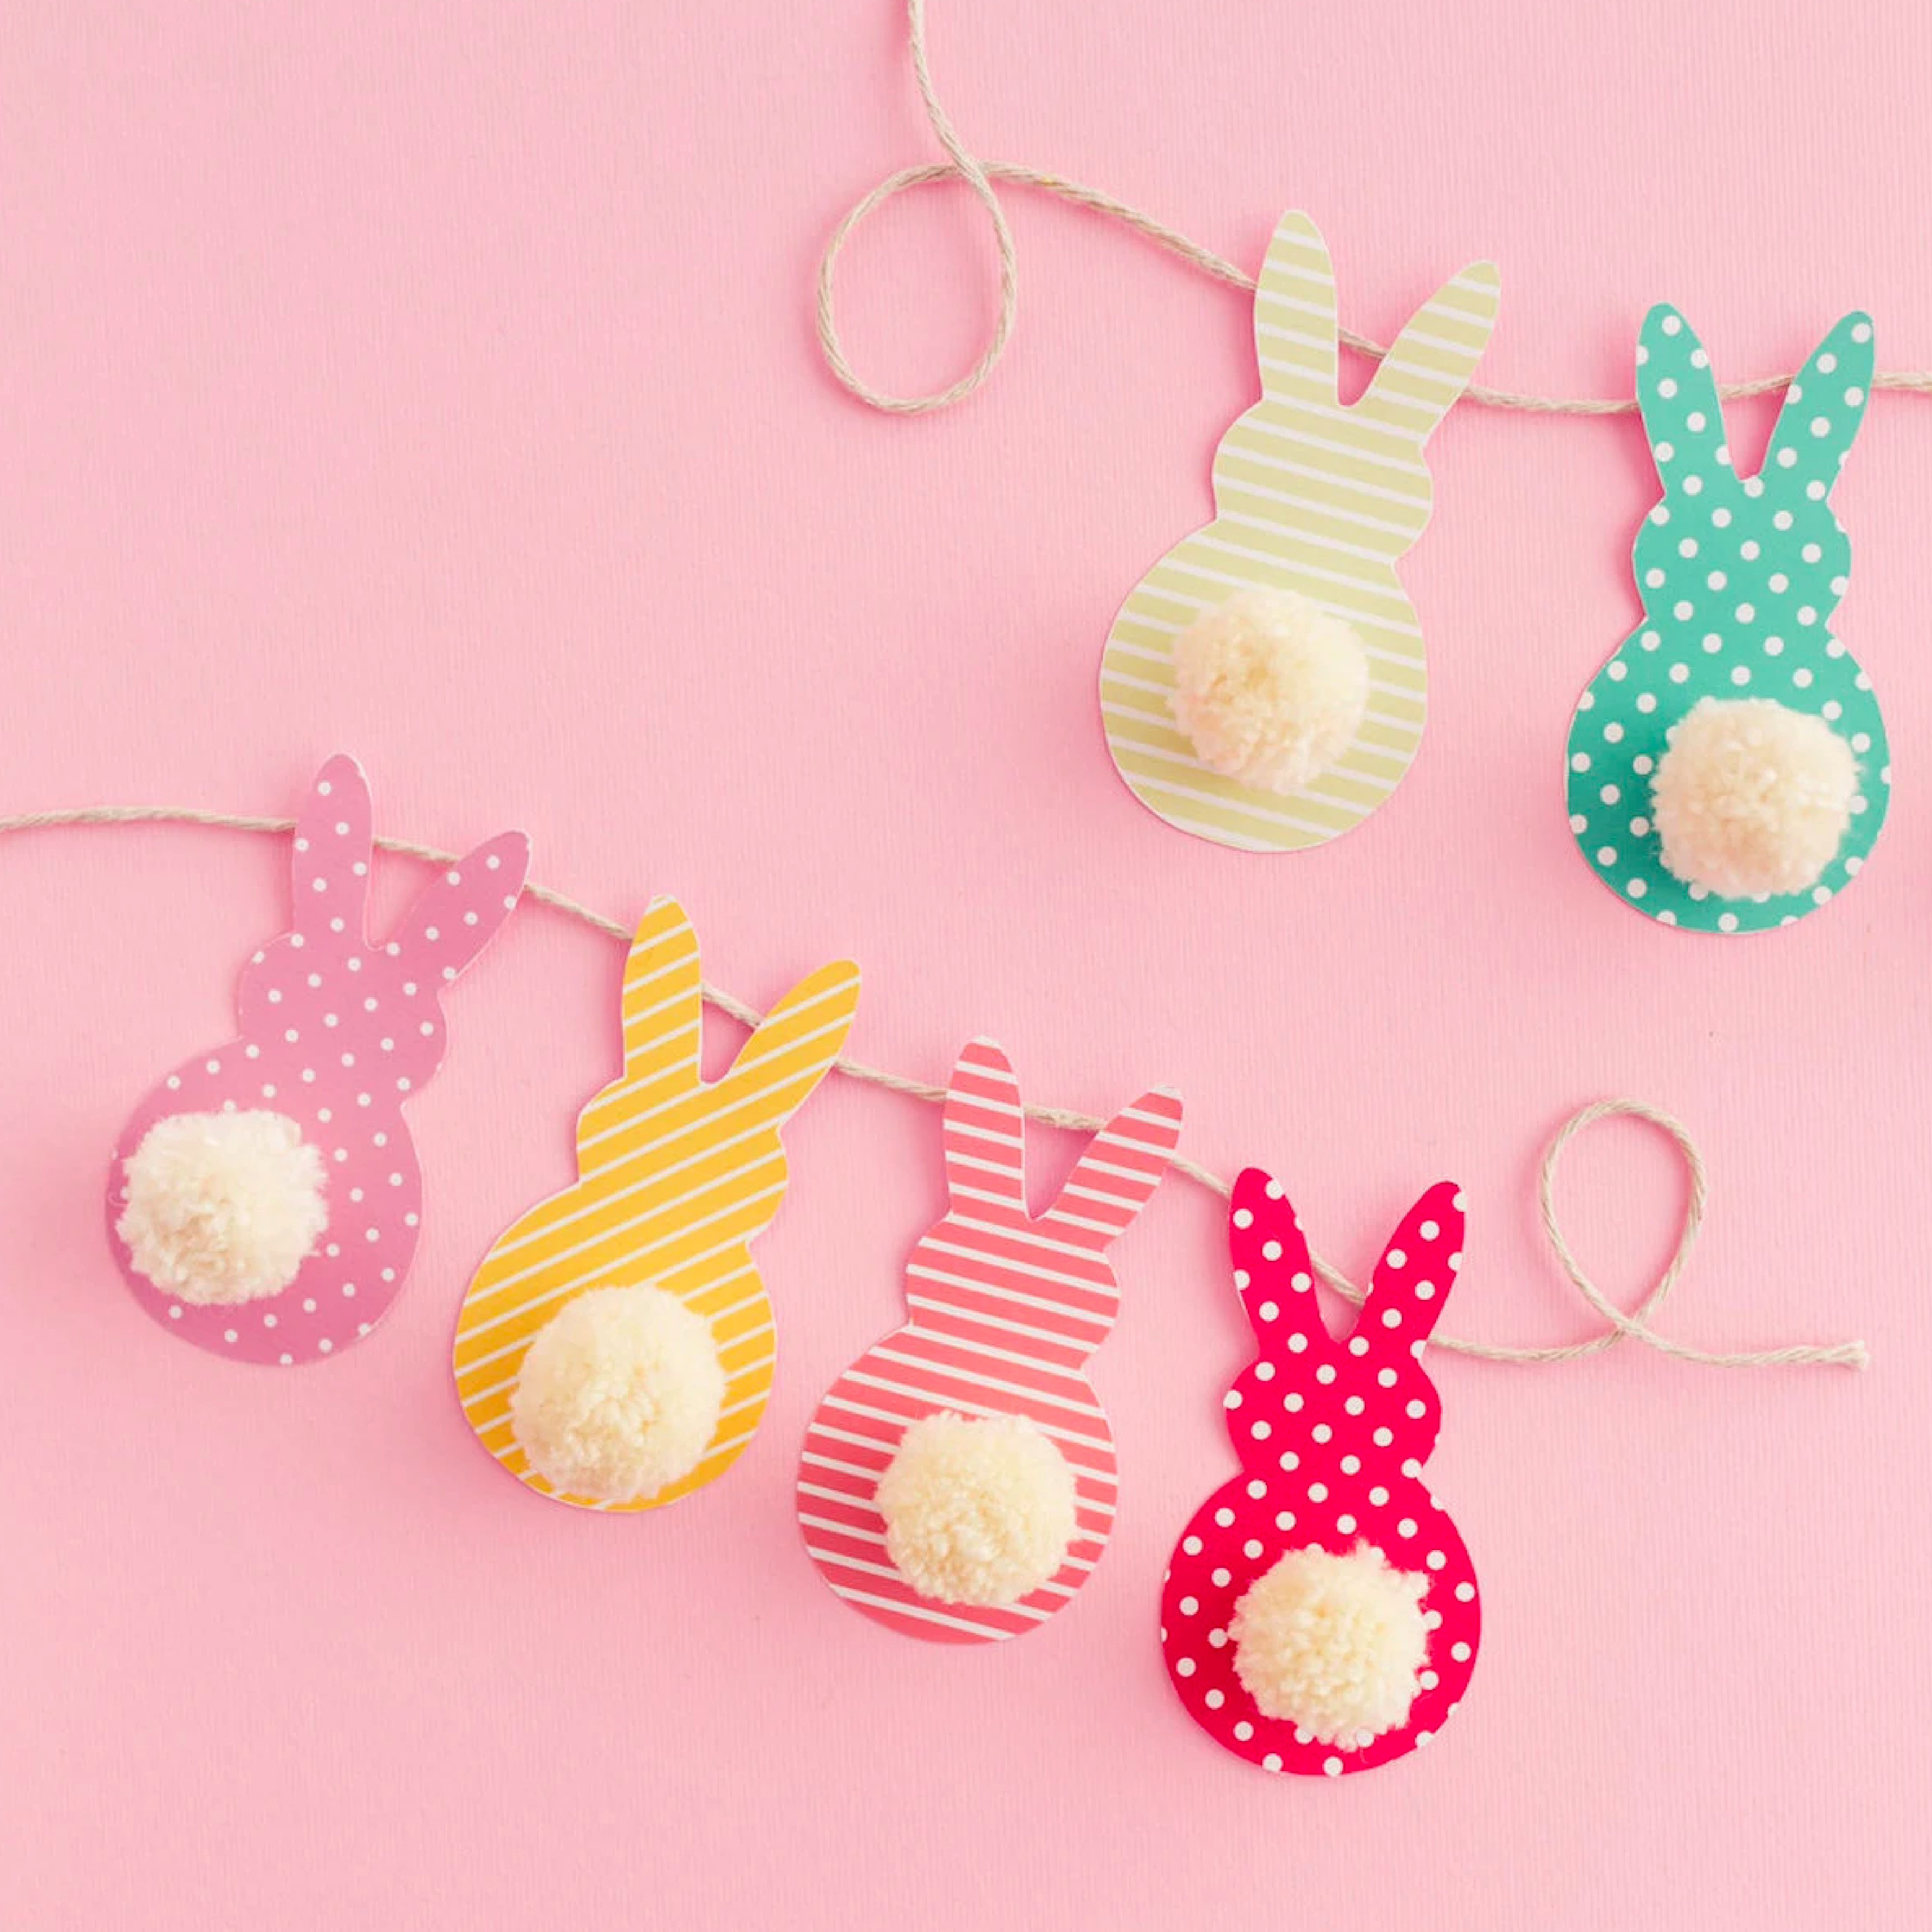 Easy and Fun Easter Crafts for Kids · The Inspiration Edit